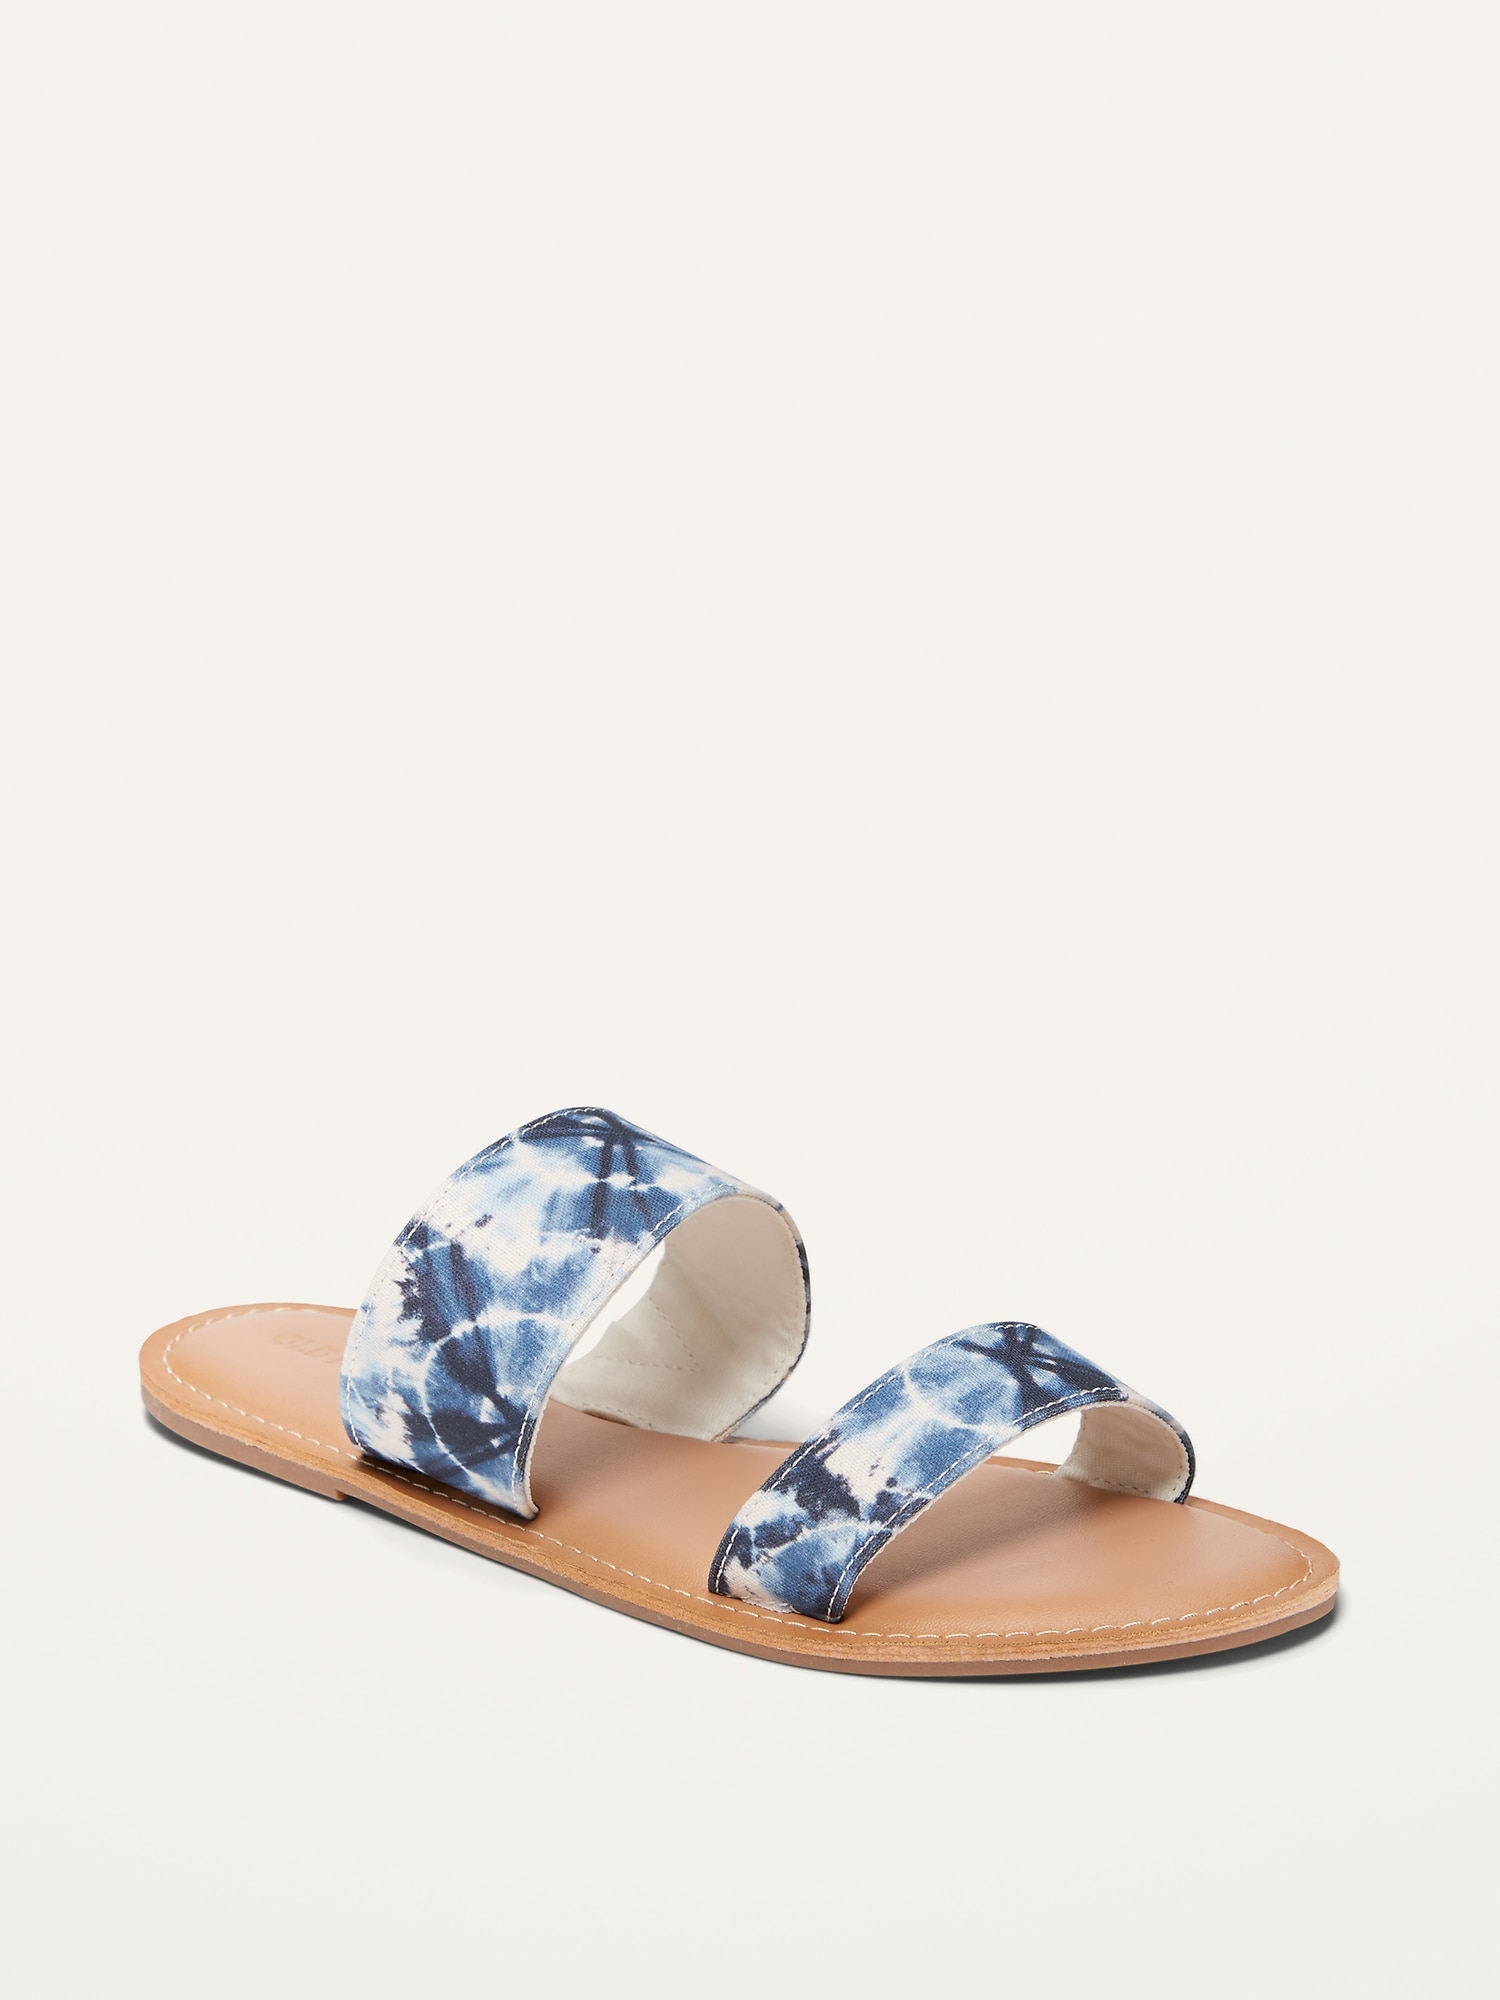 Tie-Dyed Double-Strap Sandals for Women